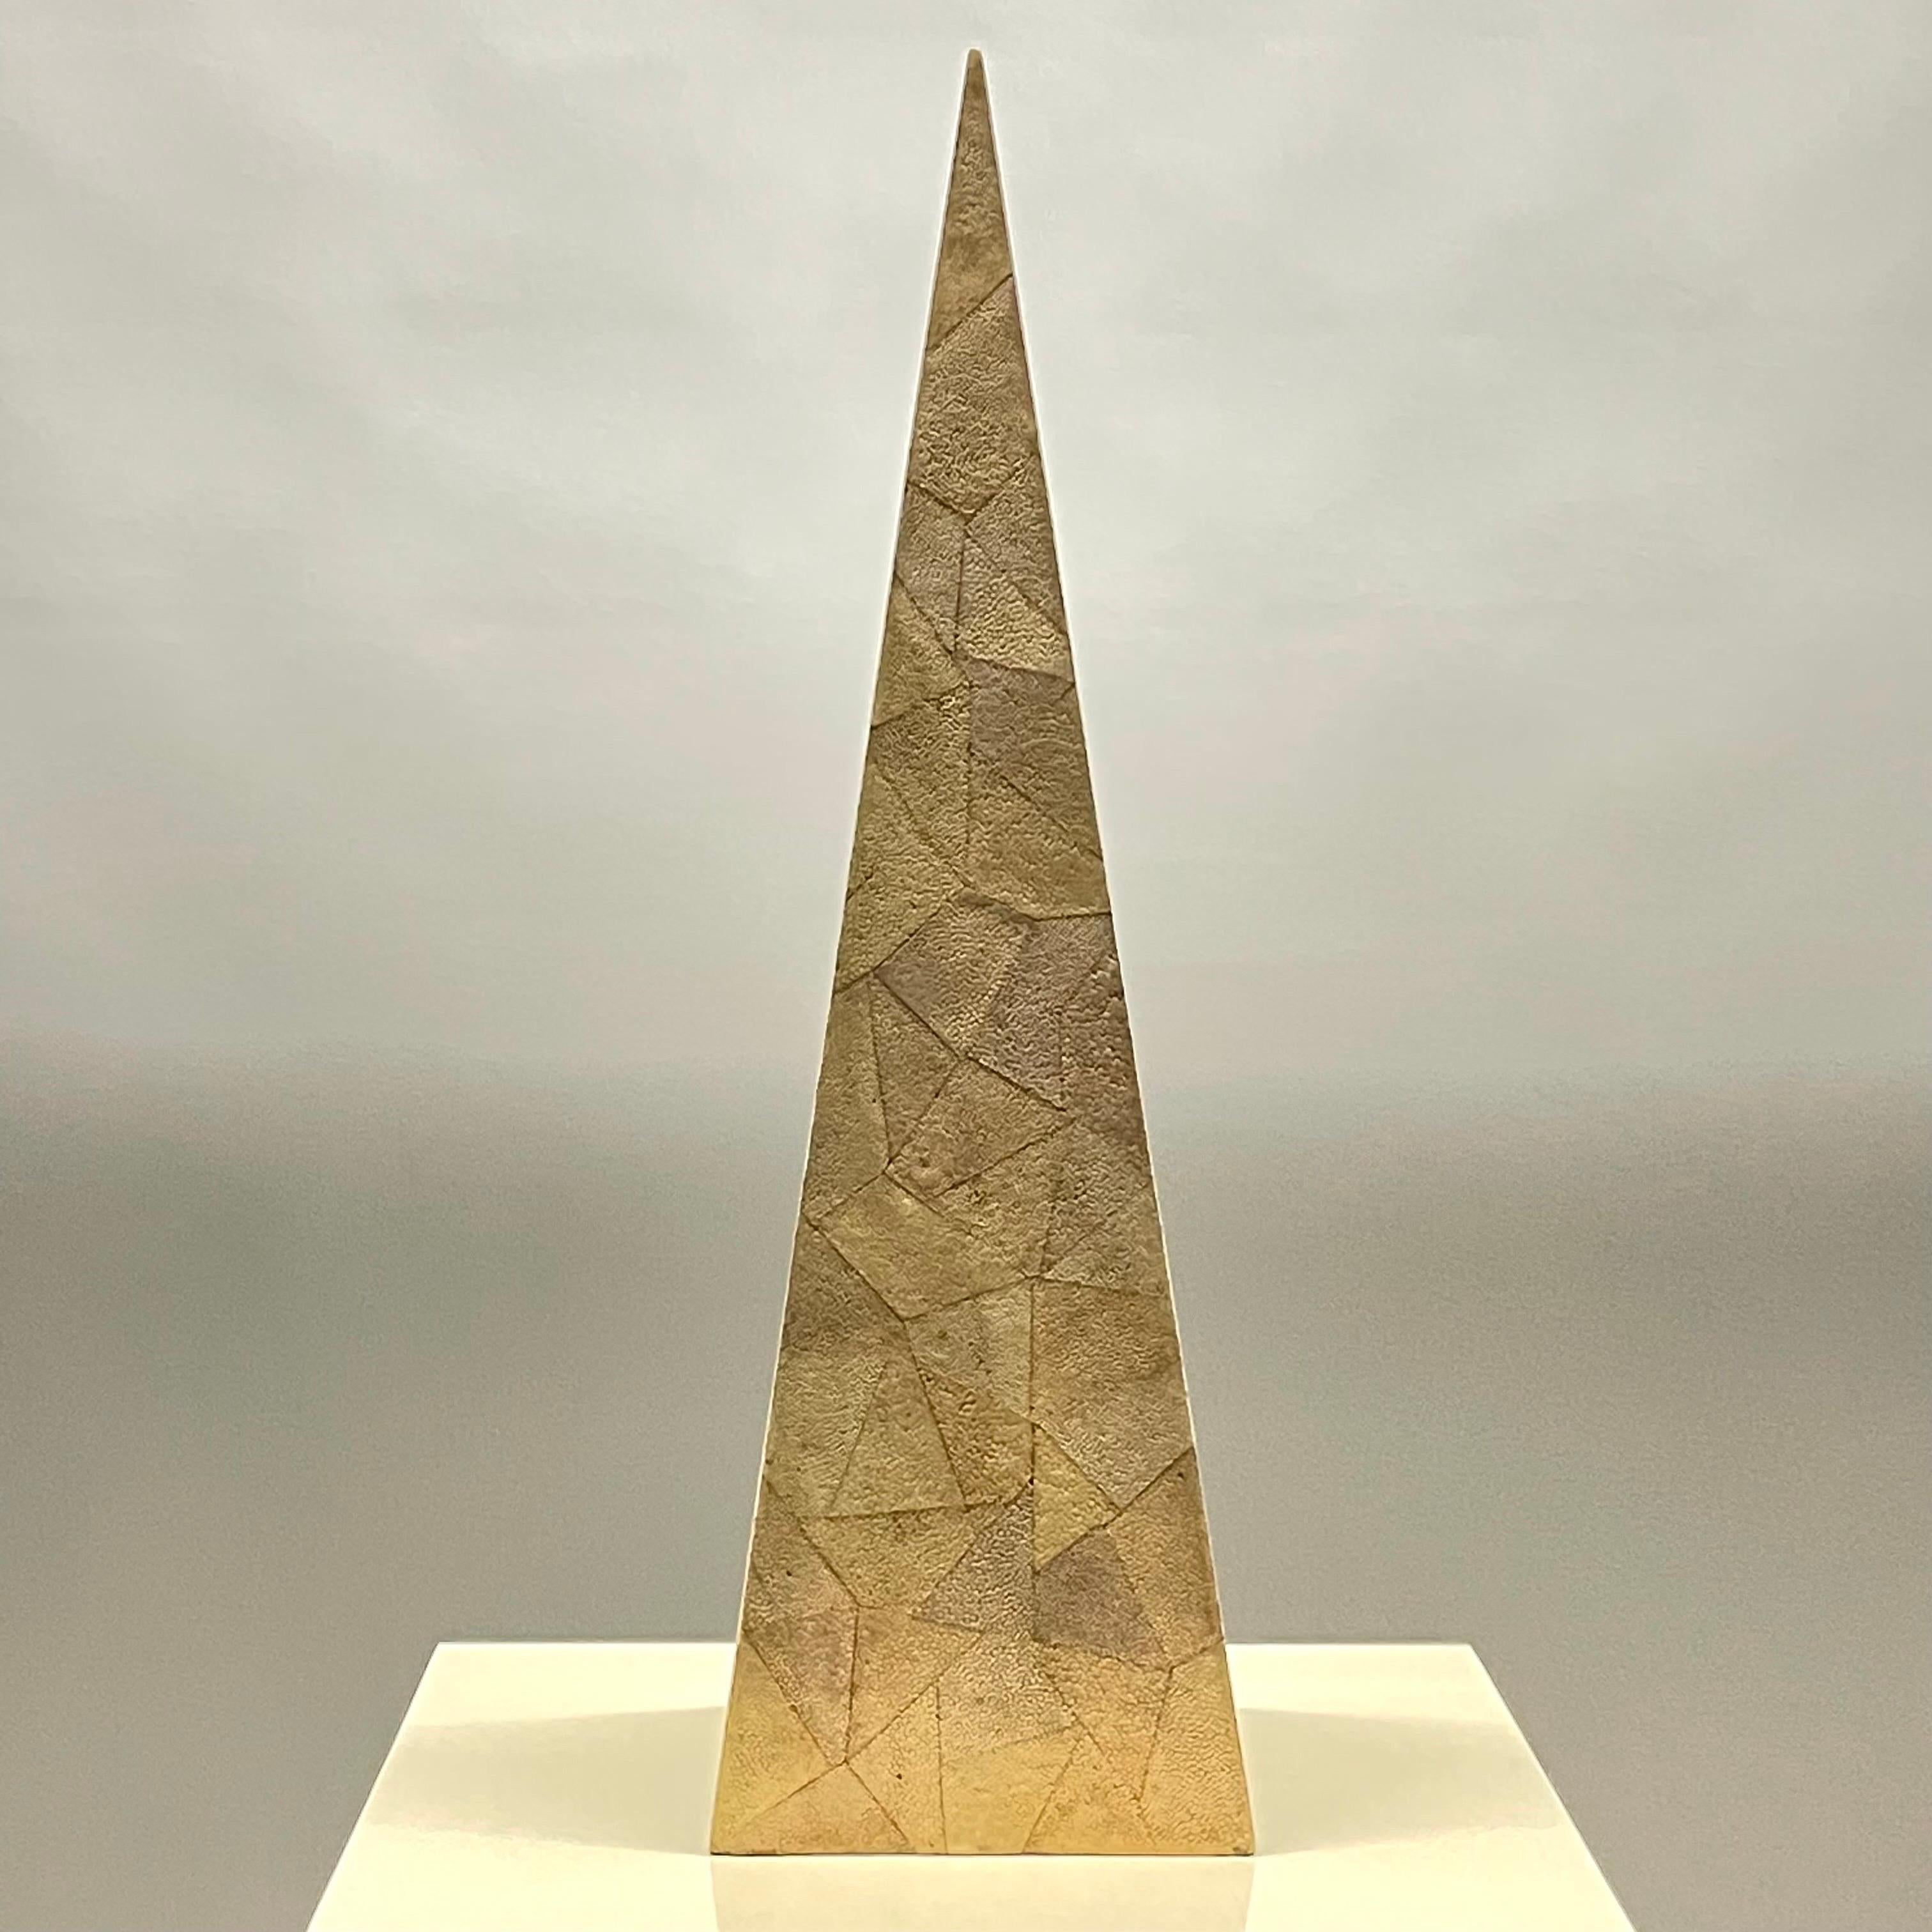 Rare stunning Obelisk or Pyramid rendered in a hand applied abstract mosaic neutral shagreen. Made in the Philippines by Maitland-Smith, LTD. Circa 1990s.